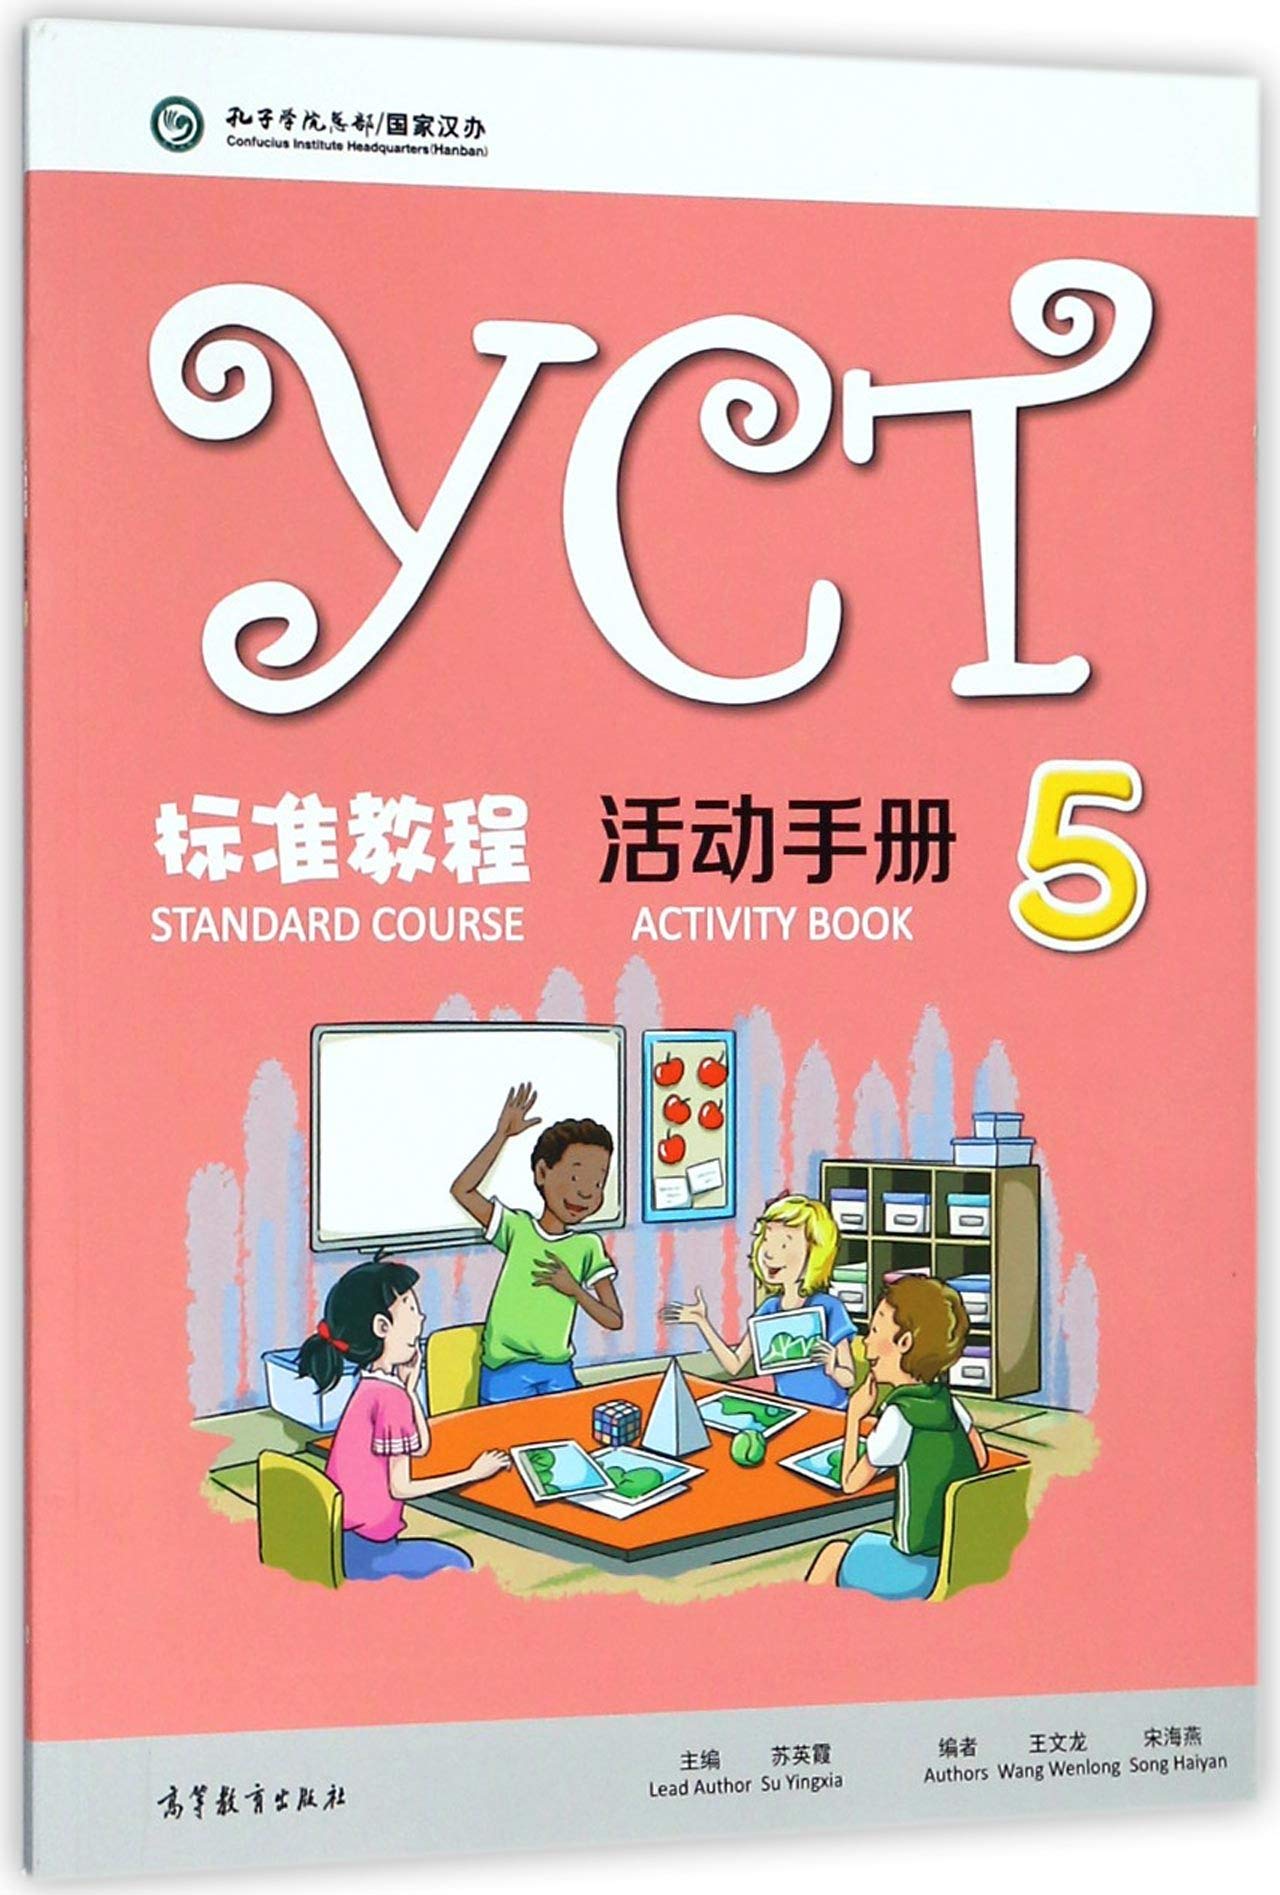 YCT標準敎程活動手冊 STANDARD COURSE 5 ACTIVITY BOOK (平裝, 1st)